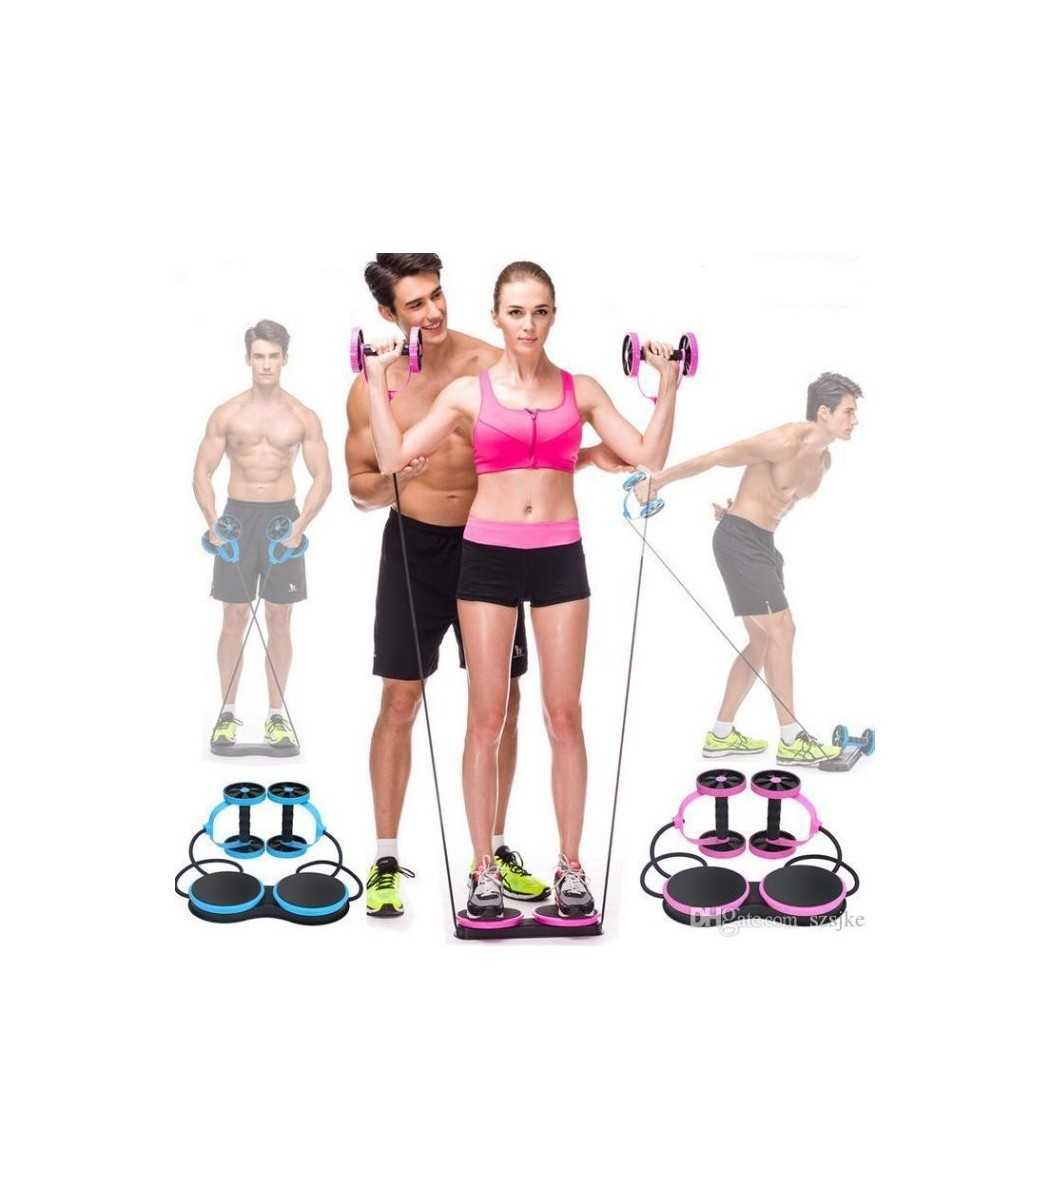 Exercise and Fitness Wheel for Home Gym,Abdomen and Arm Workout Equipment Waist Slimming Trainer for Man and Women